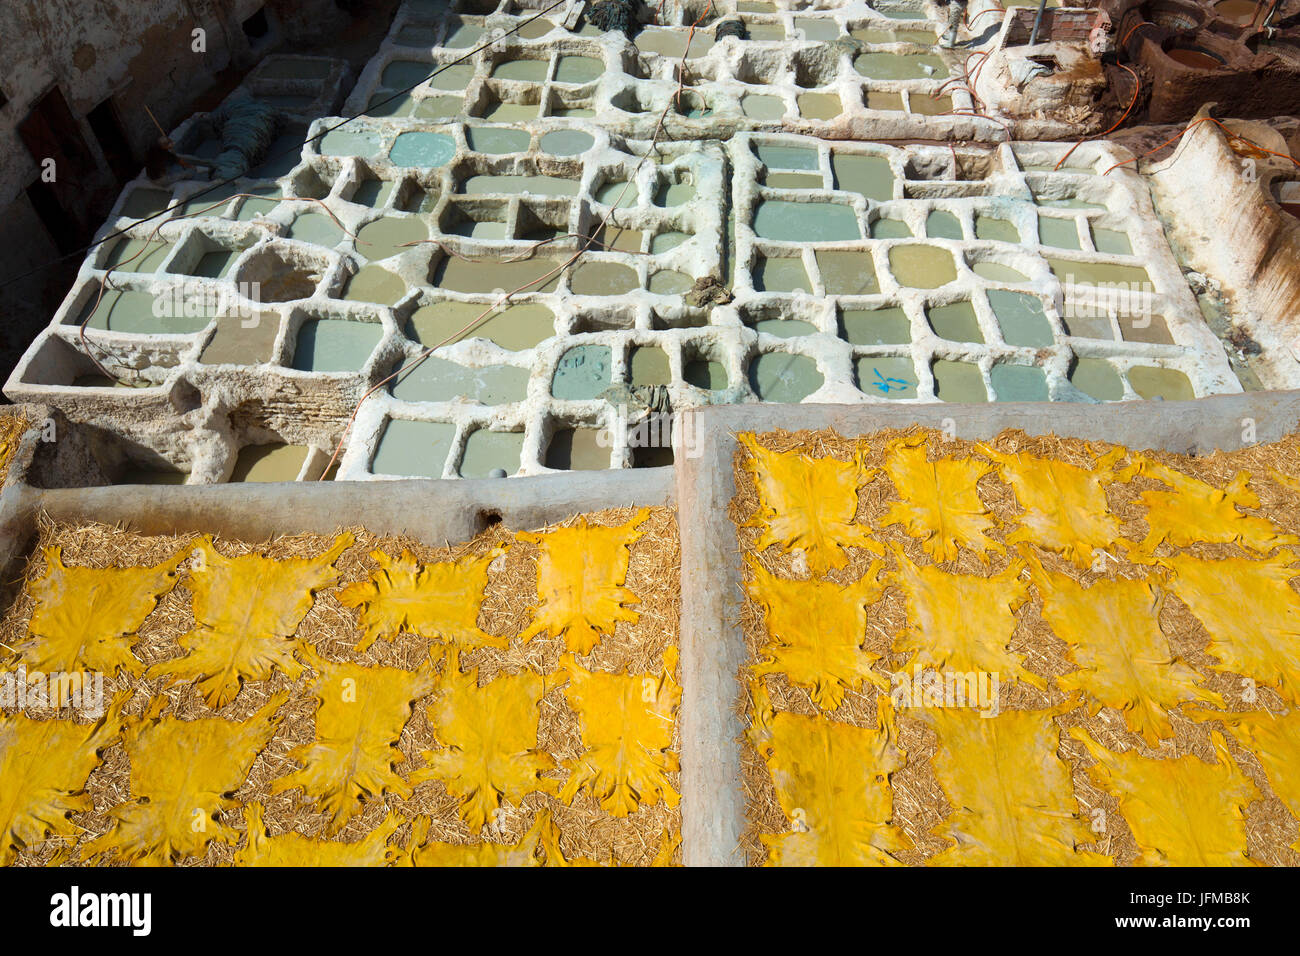 North Africa, Morocco, Fes district, Fez Tannery, Chouara Tannery, Leather processing Stock Photo